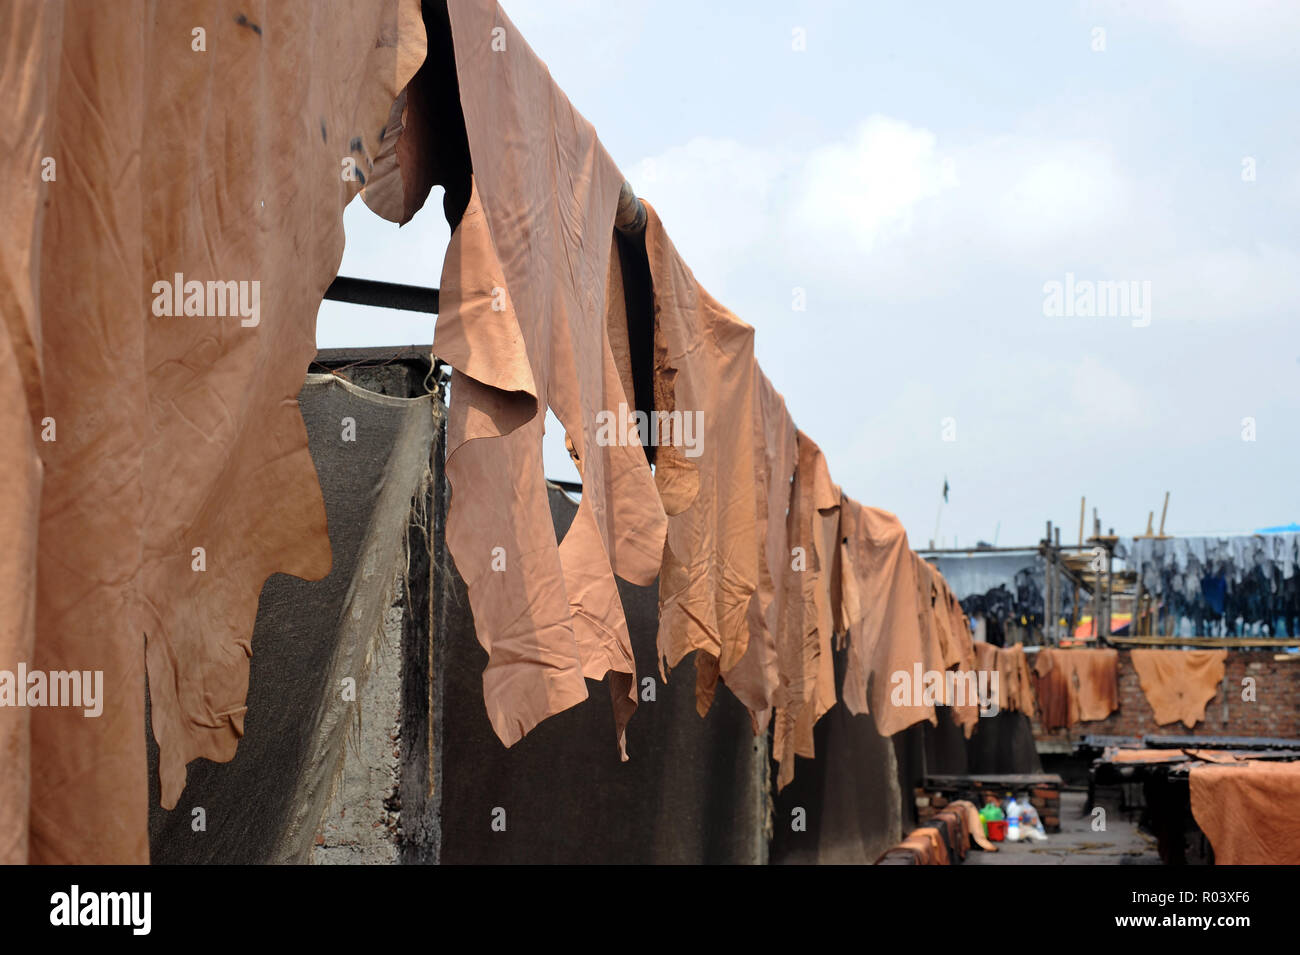 Dhaka, Bangladesh - April 04, 2016: Processed lather dries under the sun at the Hazaribagh tannery area in Dhaka, Bangladesh. Stock Photo